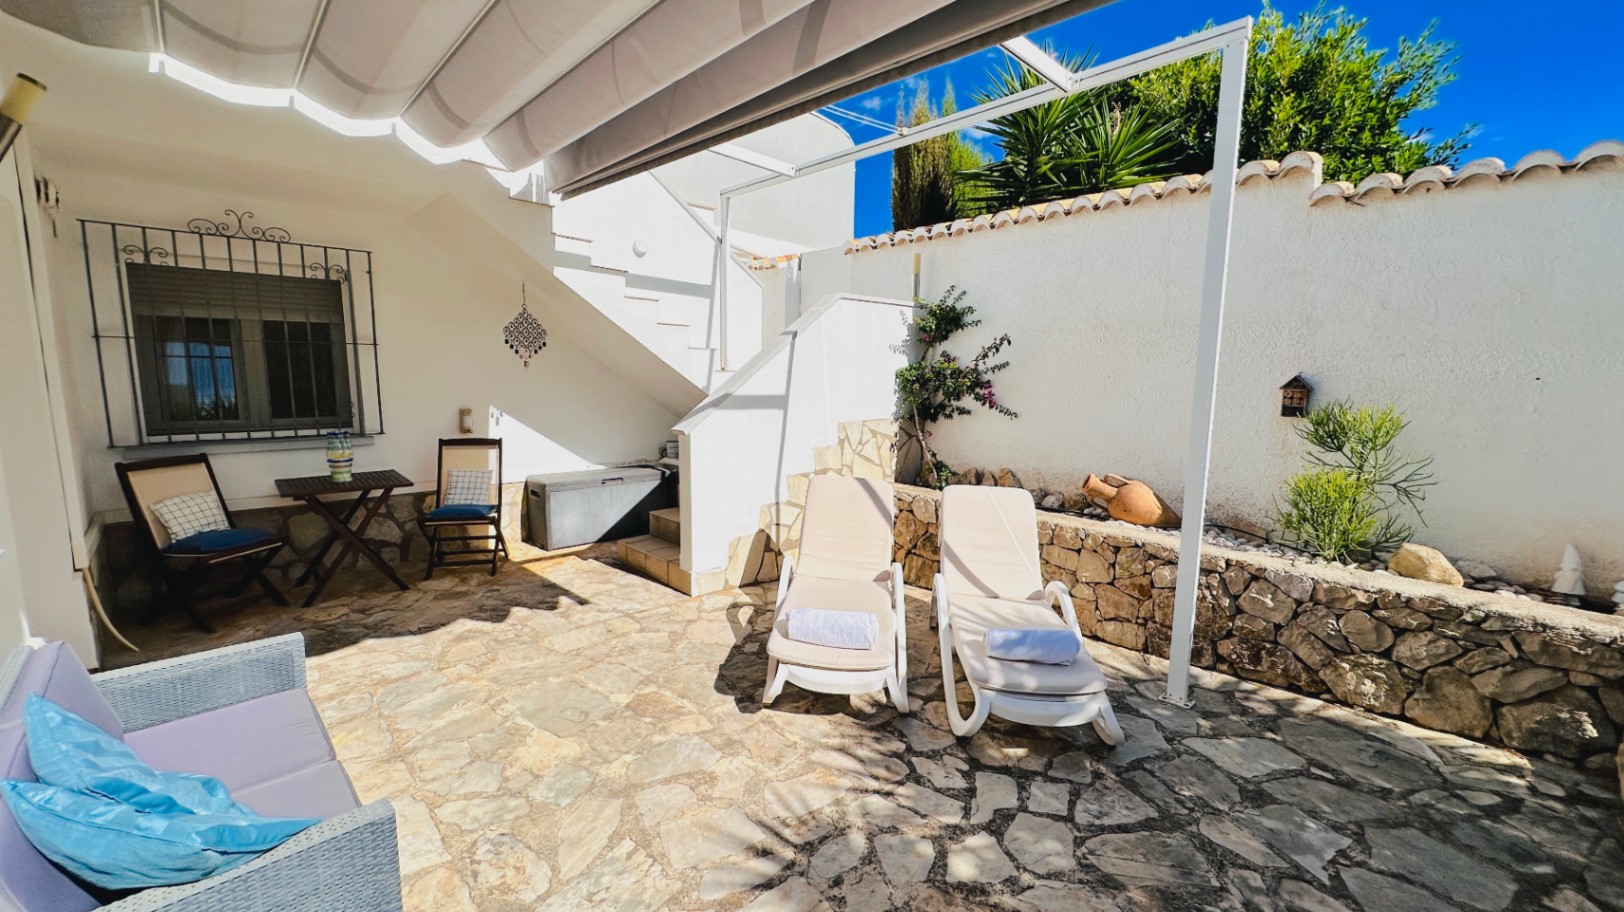 Very well maintained, top renovated villa with sea views and many extras.